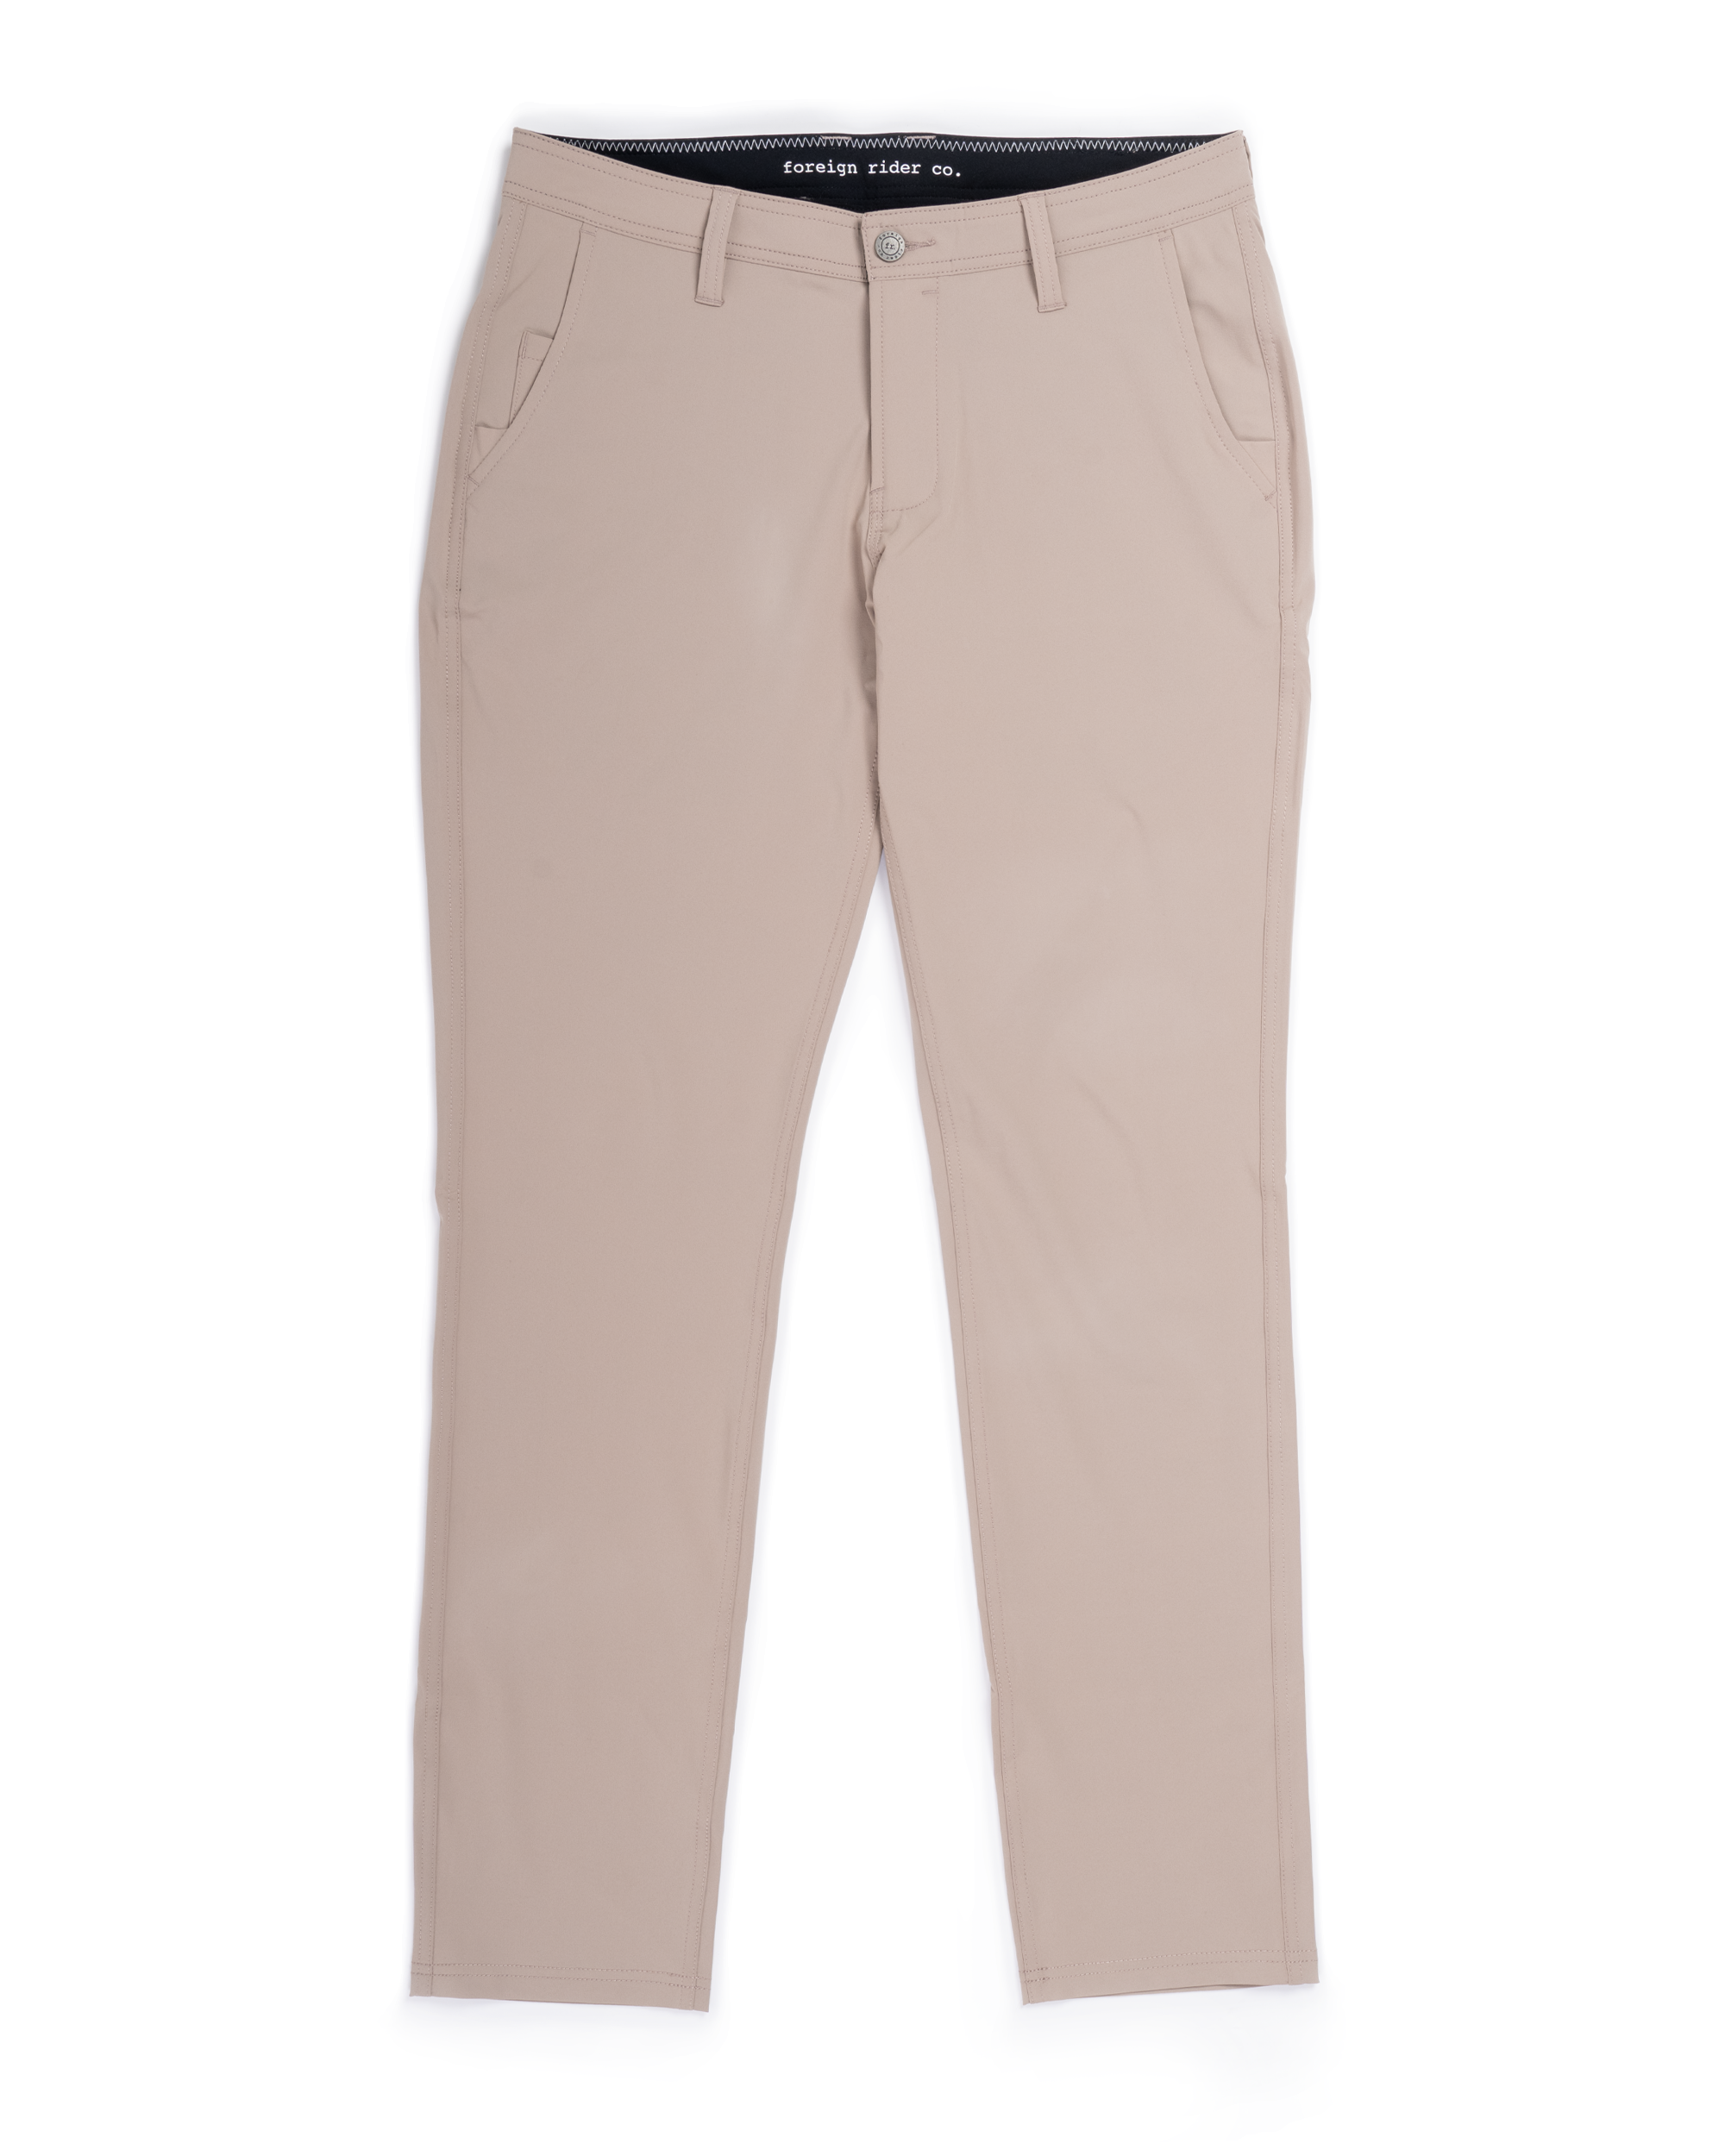 Performance Pants Tan - Foreign Rider Co.